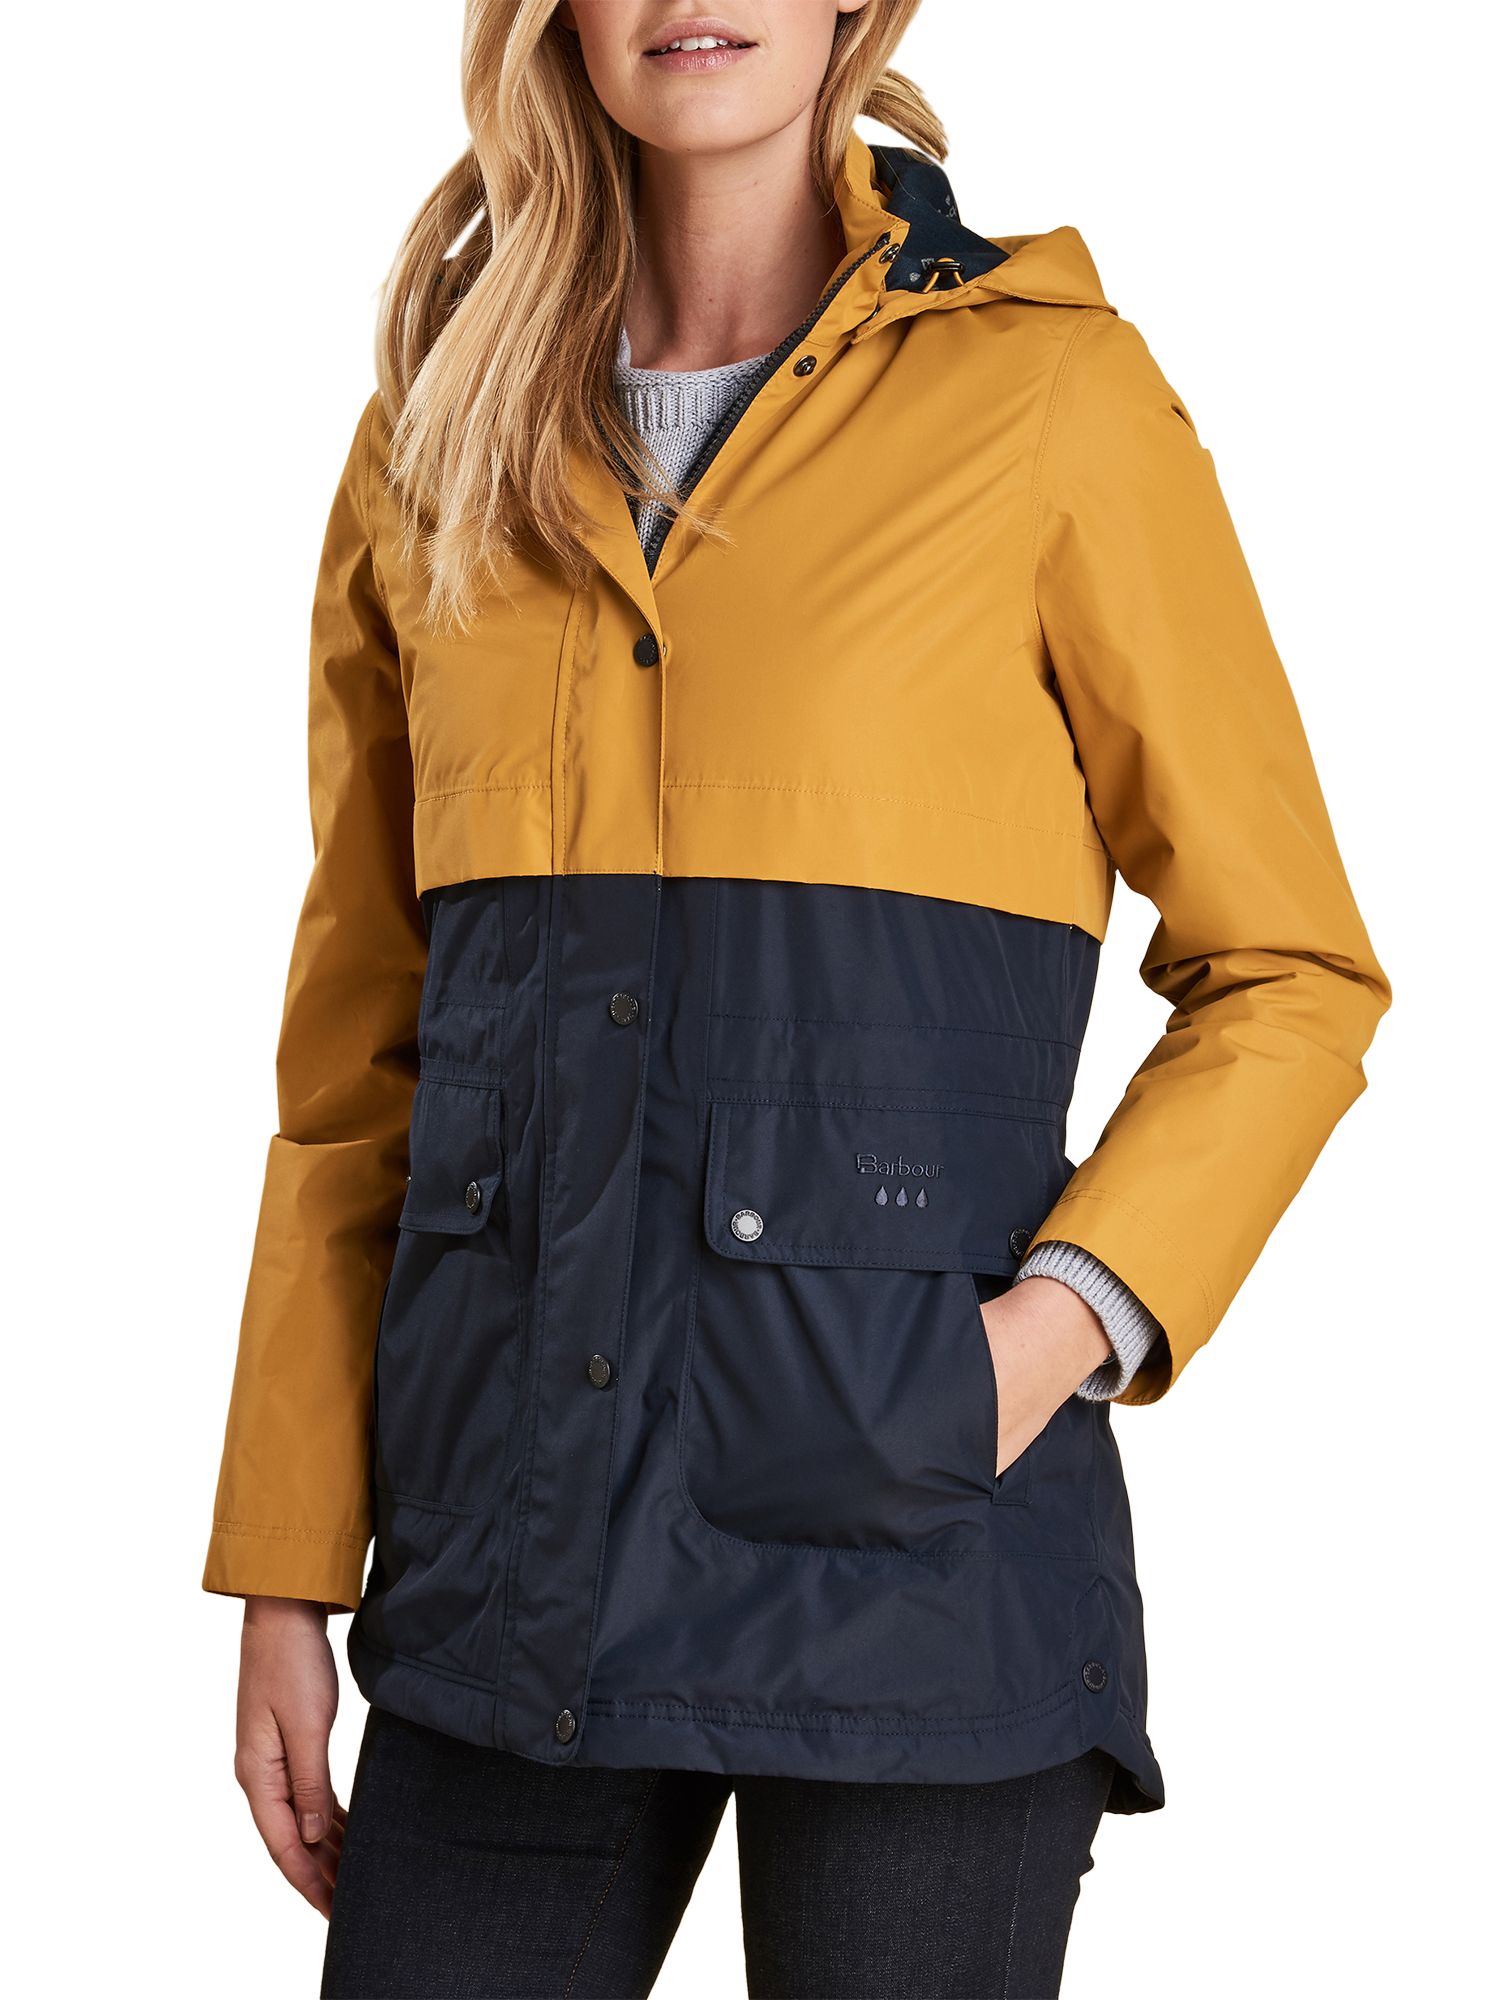 barbour altair jacket yellow 